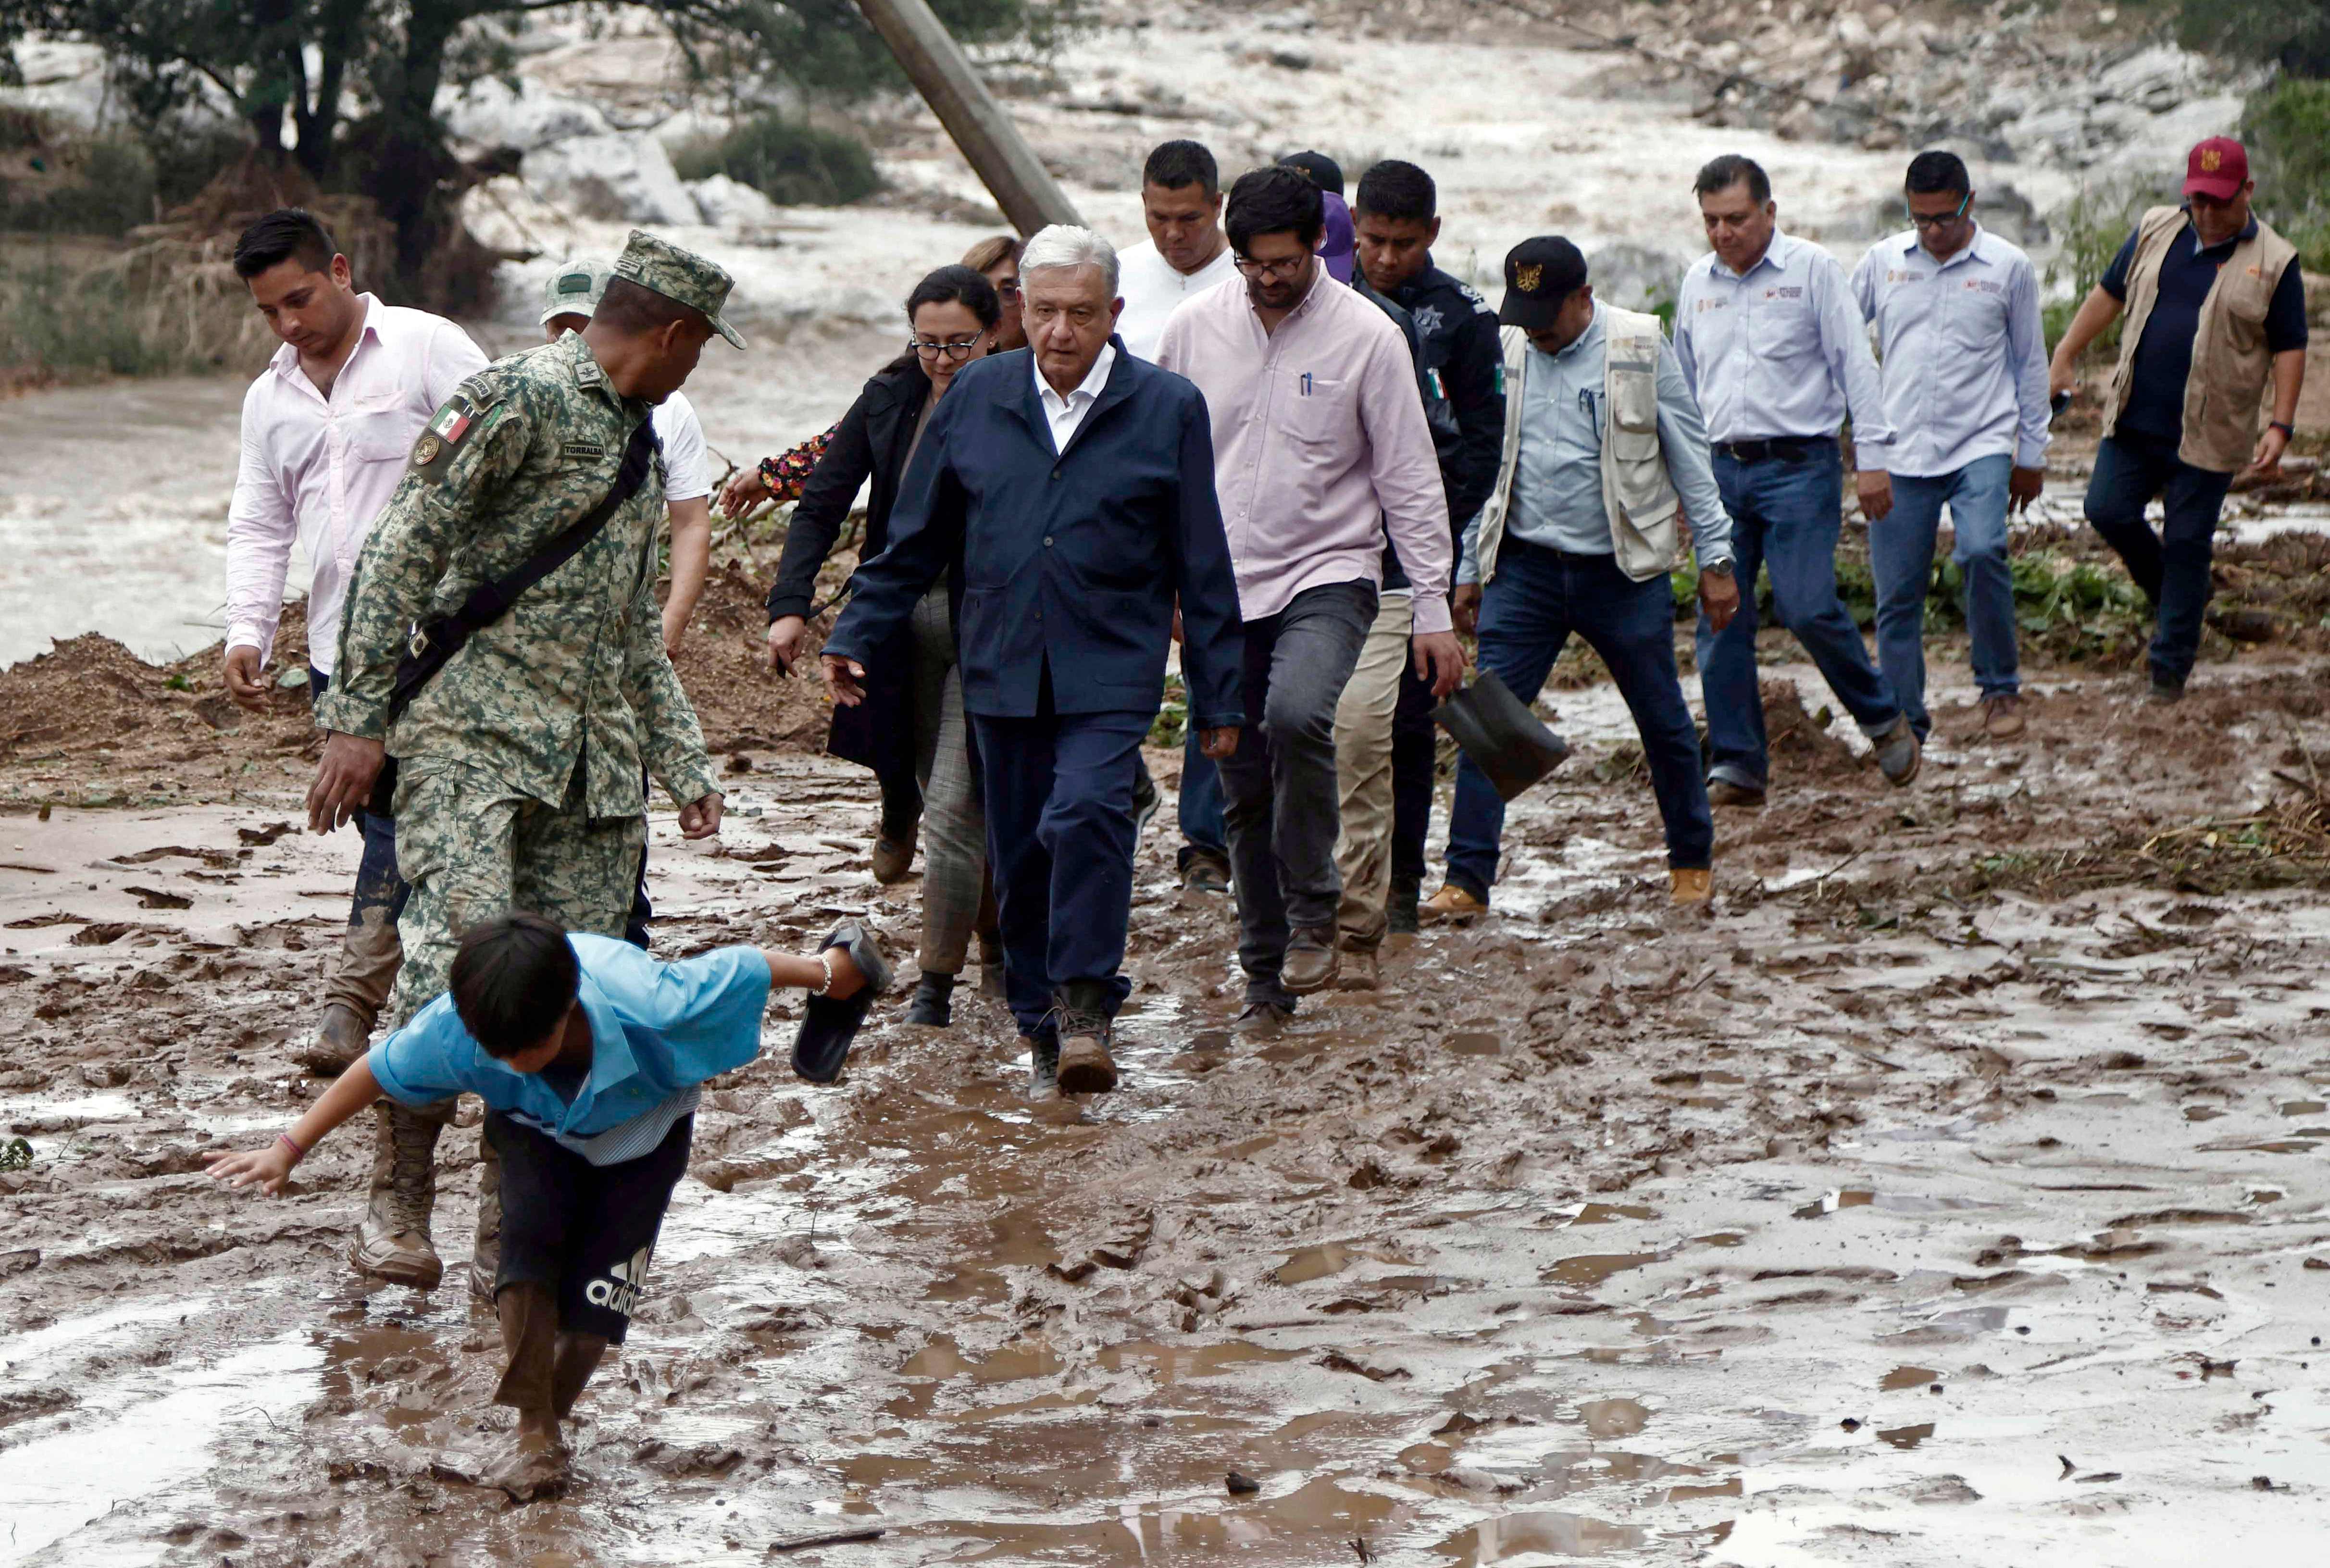 Lopez Obrador and members of his cabinet walk through mud as they visit the Kilometro 42 community, near Acapulco